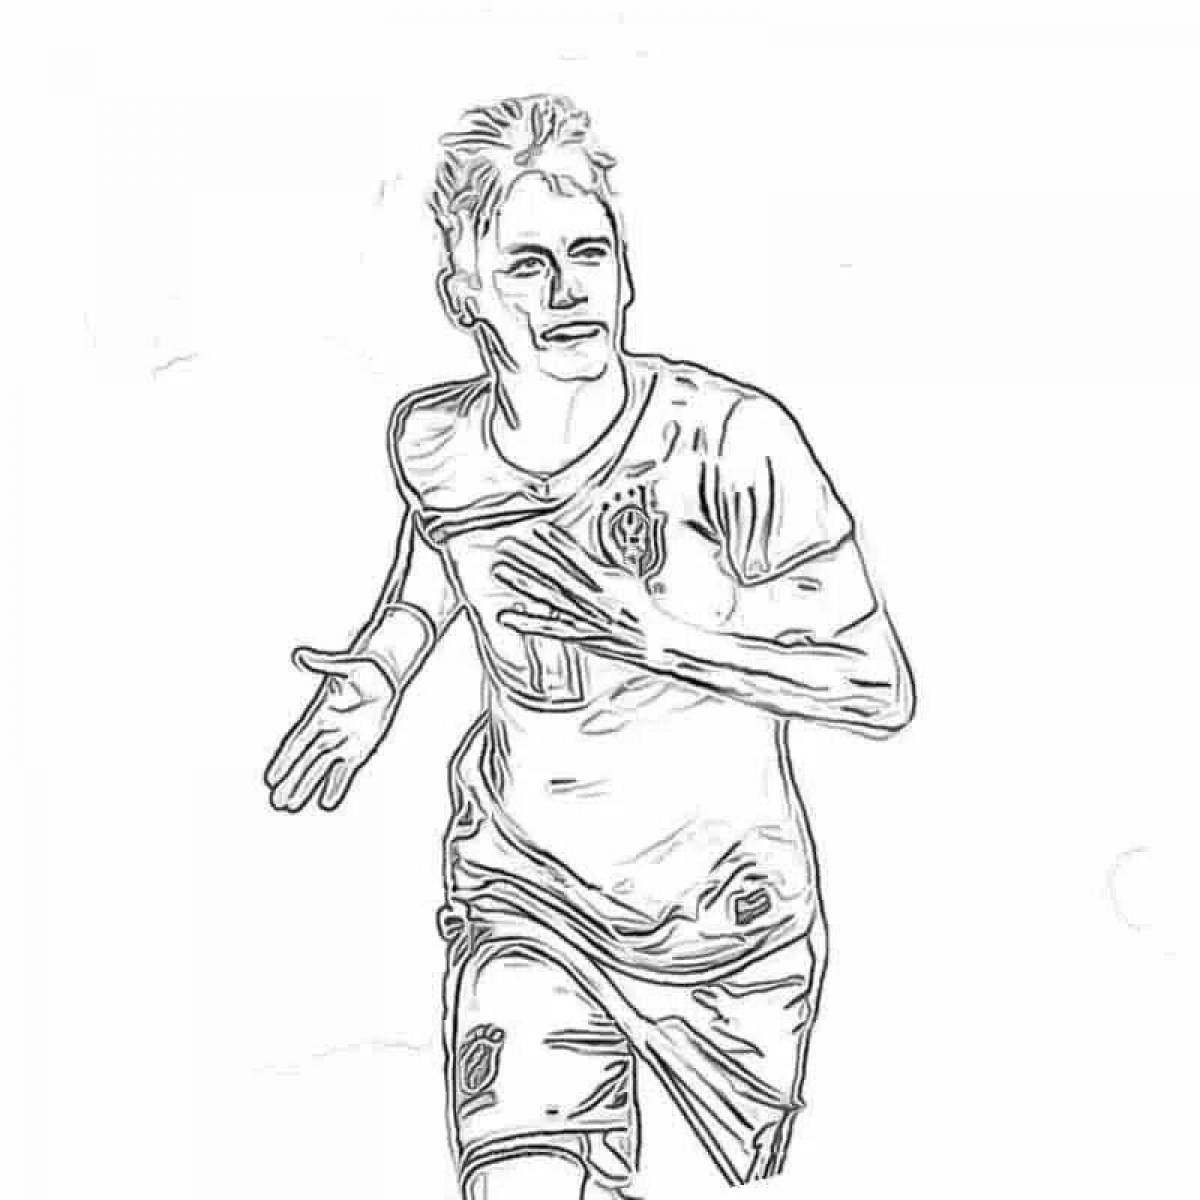 Coloring page great soccer player neymar